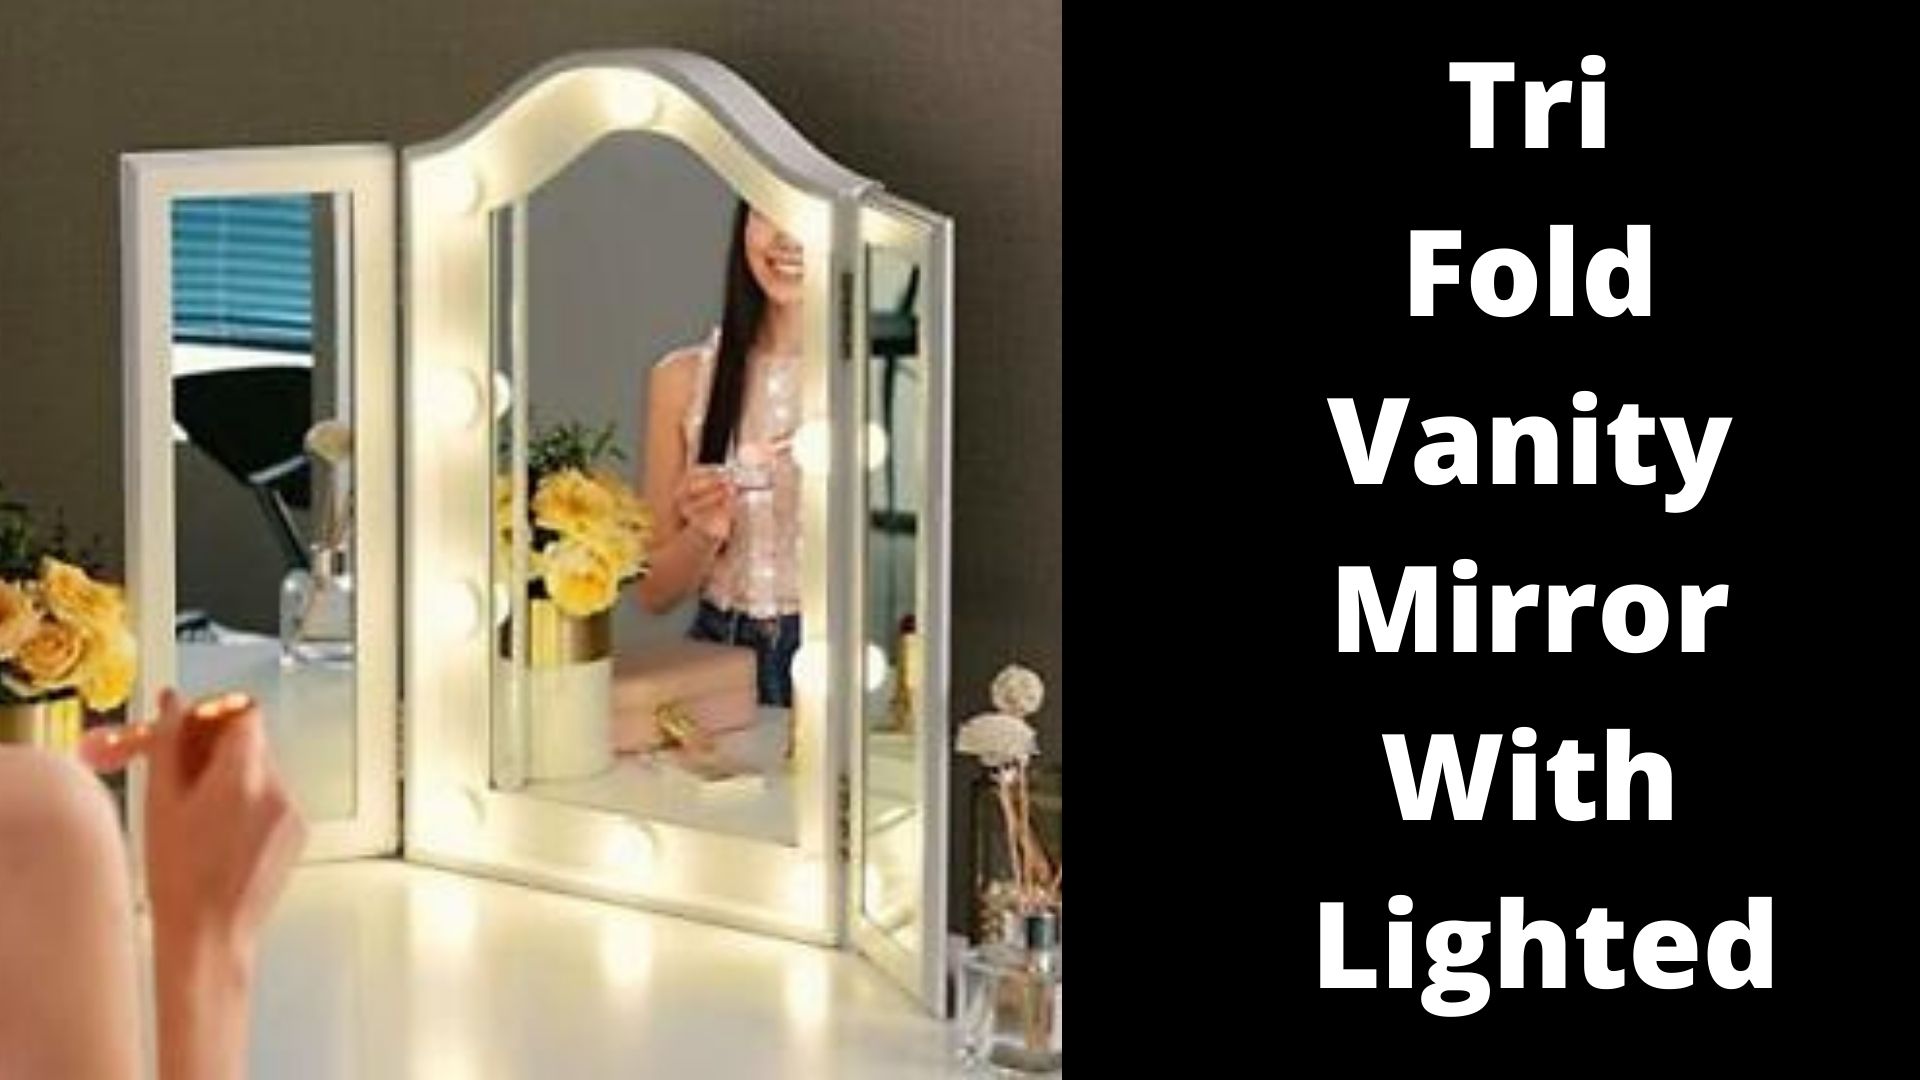 Tri Fold Vanity Mirror With Lighted